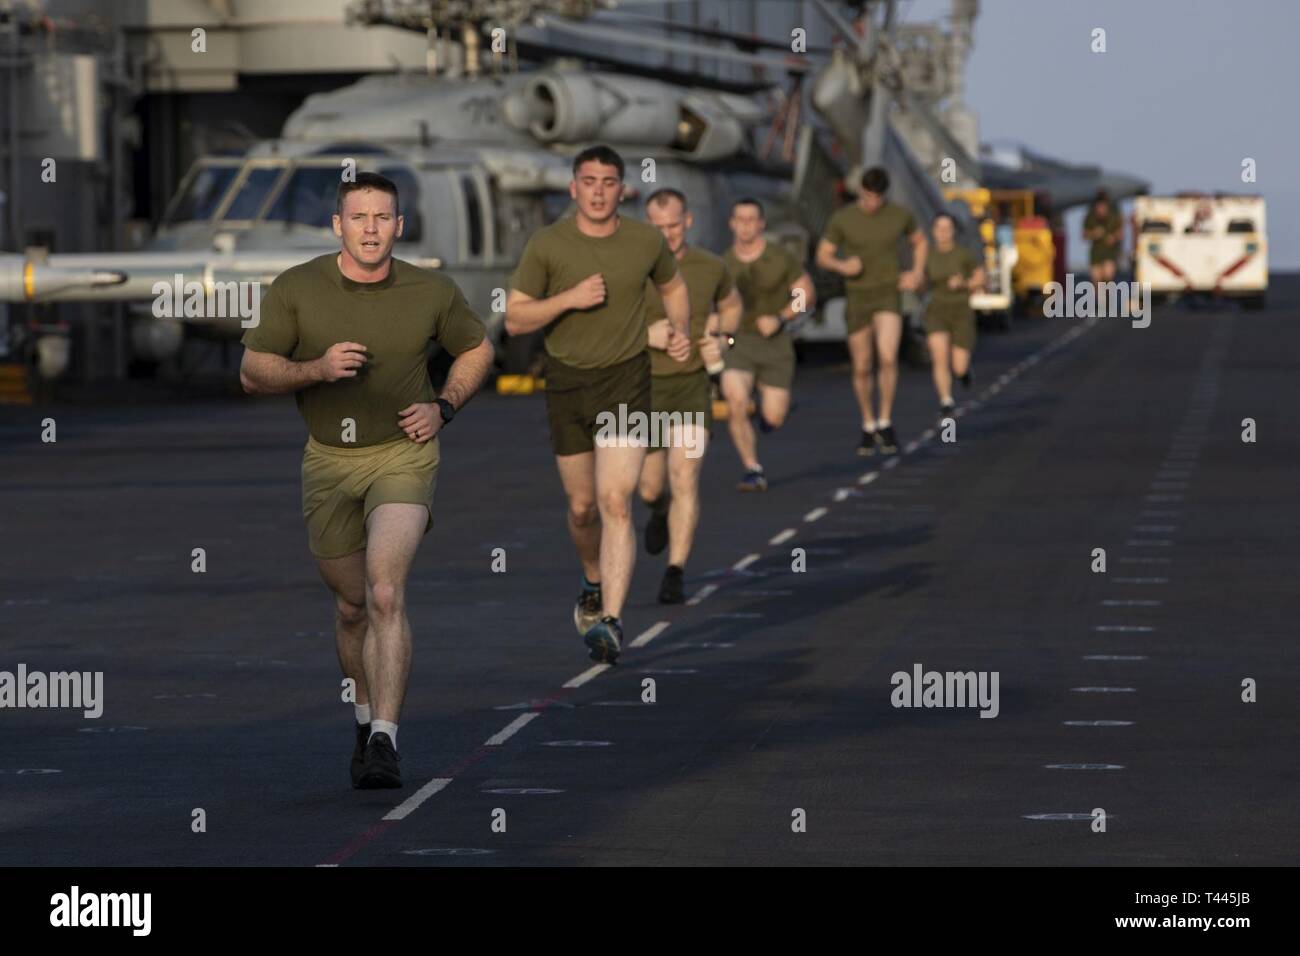 GULF OF OMAN (March 17, 2019) – U.S. Marines with the 22nd Marine Expeditionary Unit run on the flight deck during a physical fitness test aboard the Wasp-class amphibious assault ship USS Kearsarge (LHD-3). Marines performed the test before starting a Martial Arts Instructor Course to ensure they could meet the physical demands of the training. Marines and Sailors with the 22nd MEU and Kearsarge Amphibious Ready Group are currently deployed to the U.S. 5th Fleet area of operations in support of naval operations to ensure maritime stability and security in the Central region, connecting the Me Stock Photo